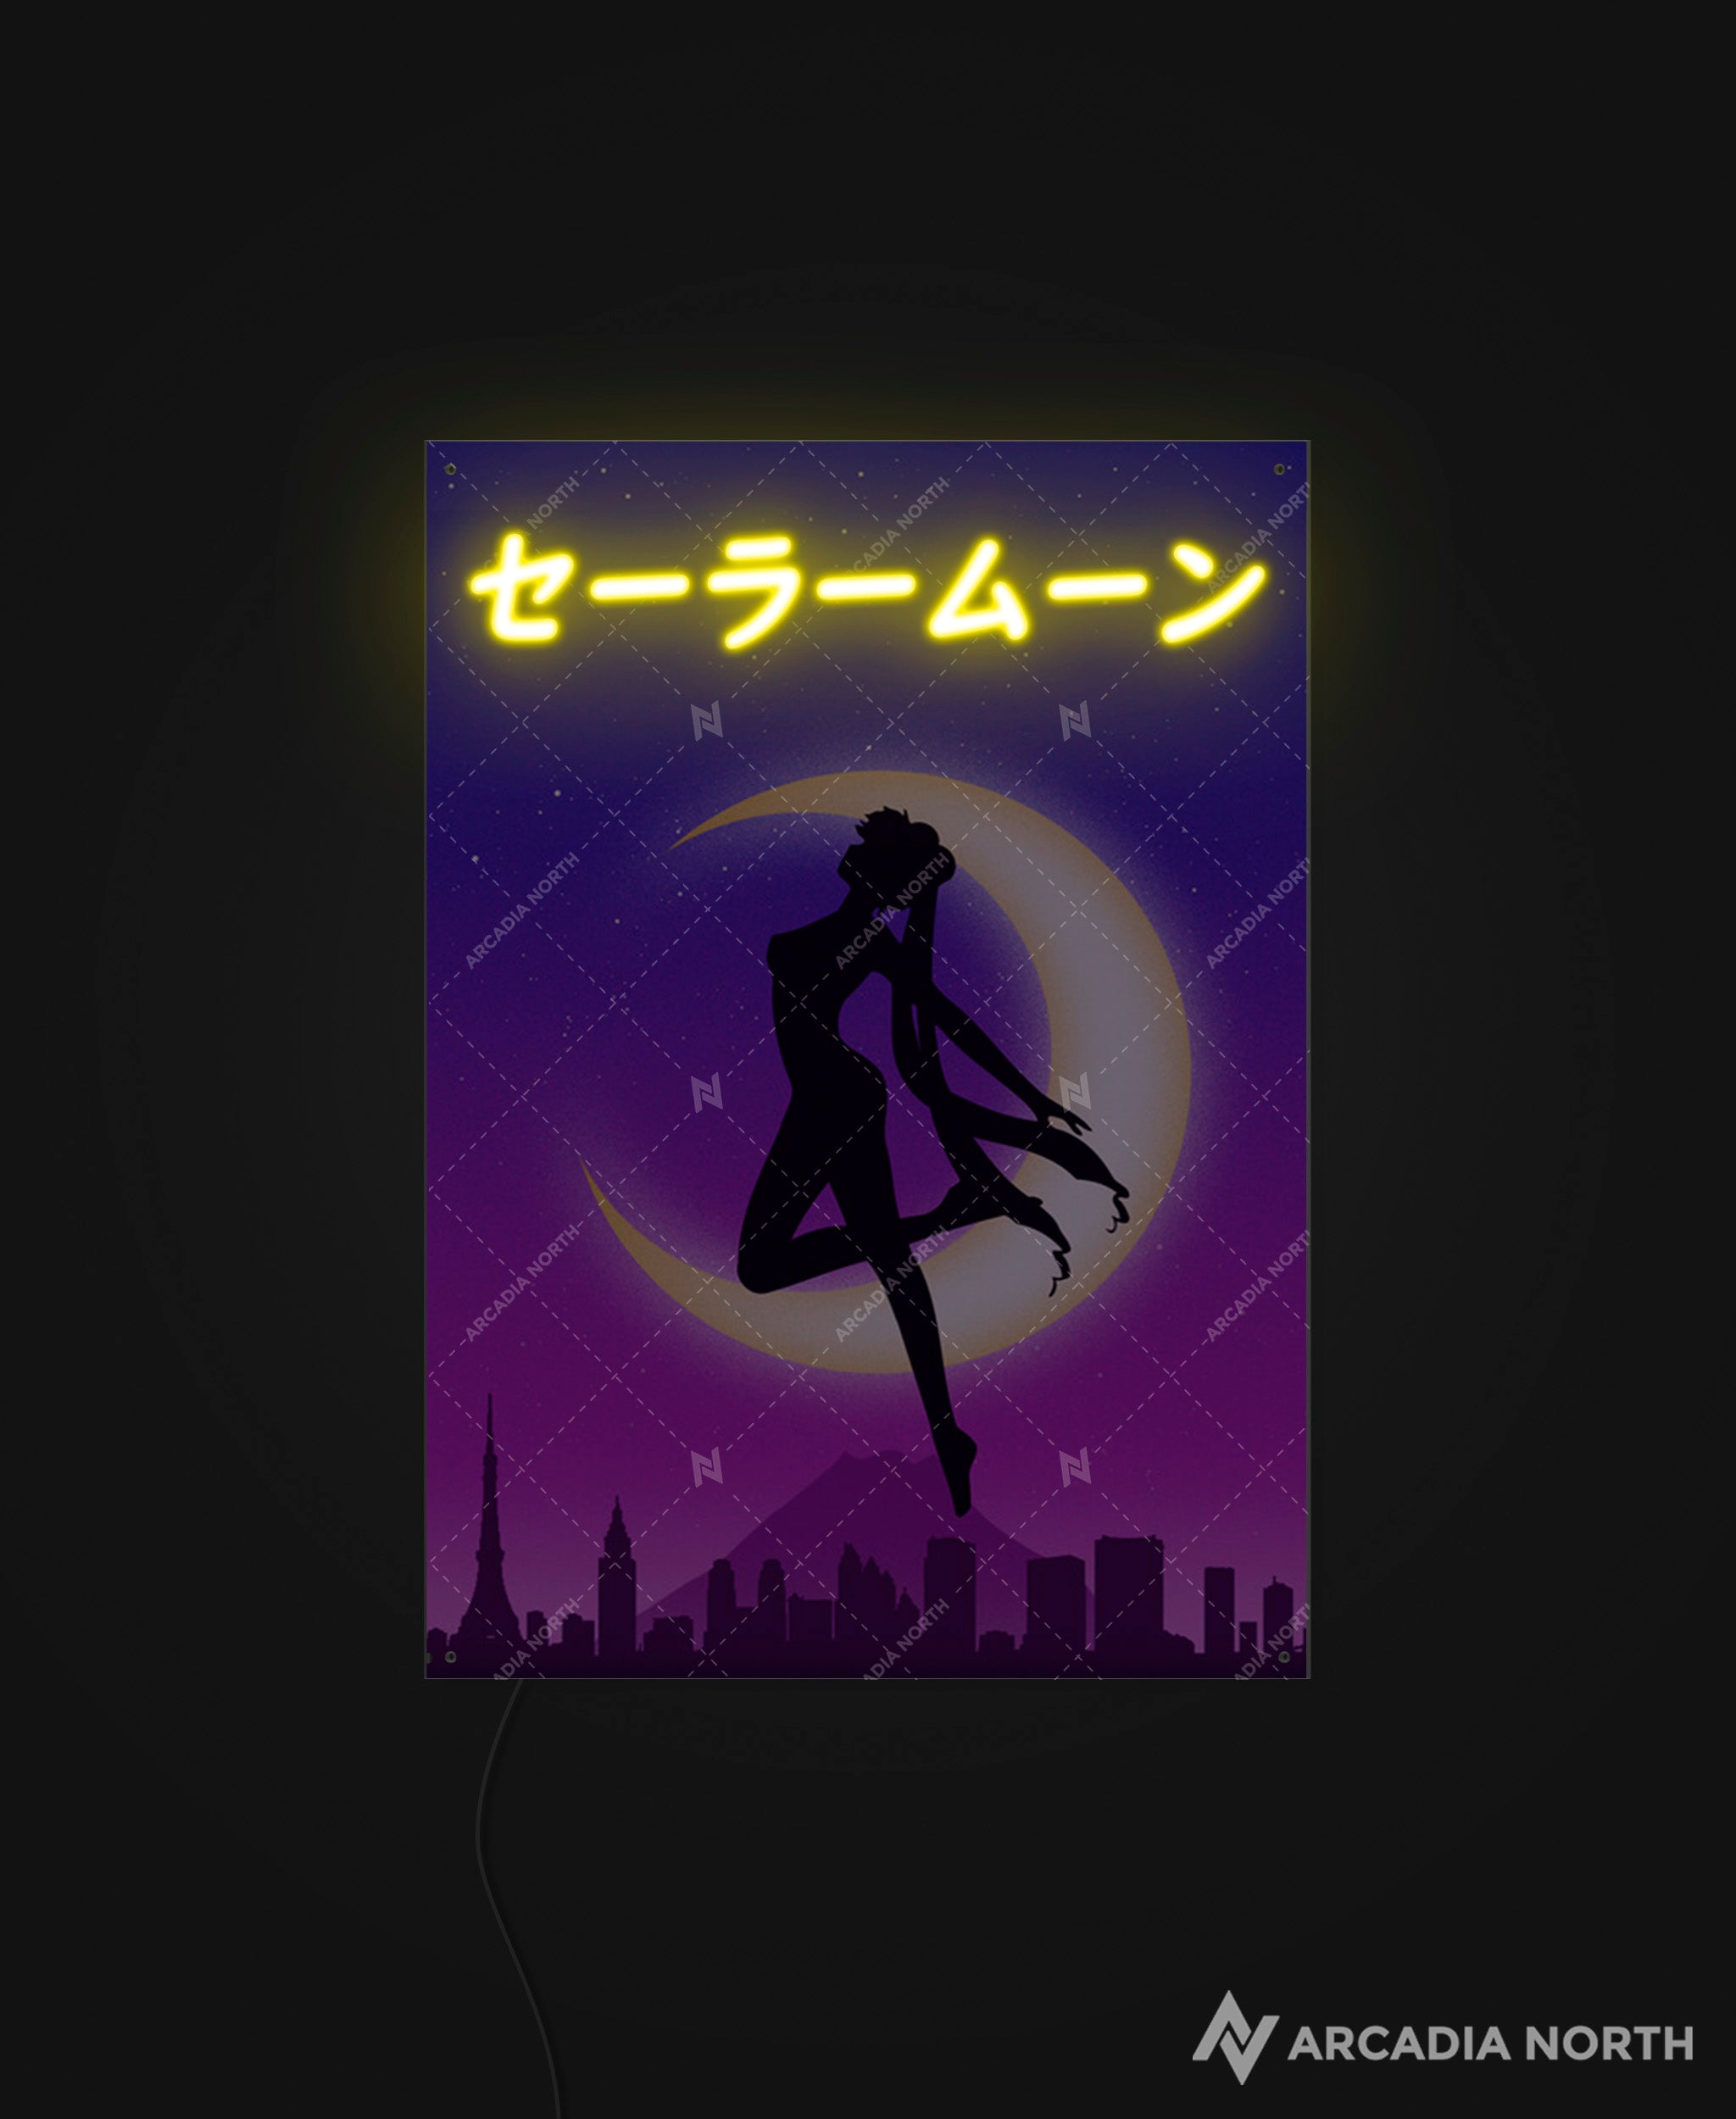 Arcadia North AURALIGHT - an acrylic LED Poster featuring the anime Sailor Moon with Usagi Tsukino. Sailor Moon is written in Japanese Katakana and illuminated by glowing neon LED lights. UV-printed on acrylic.